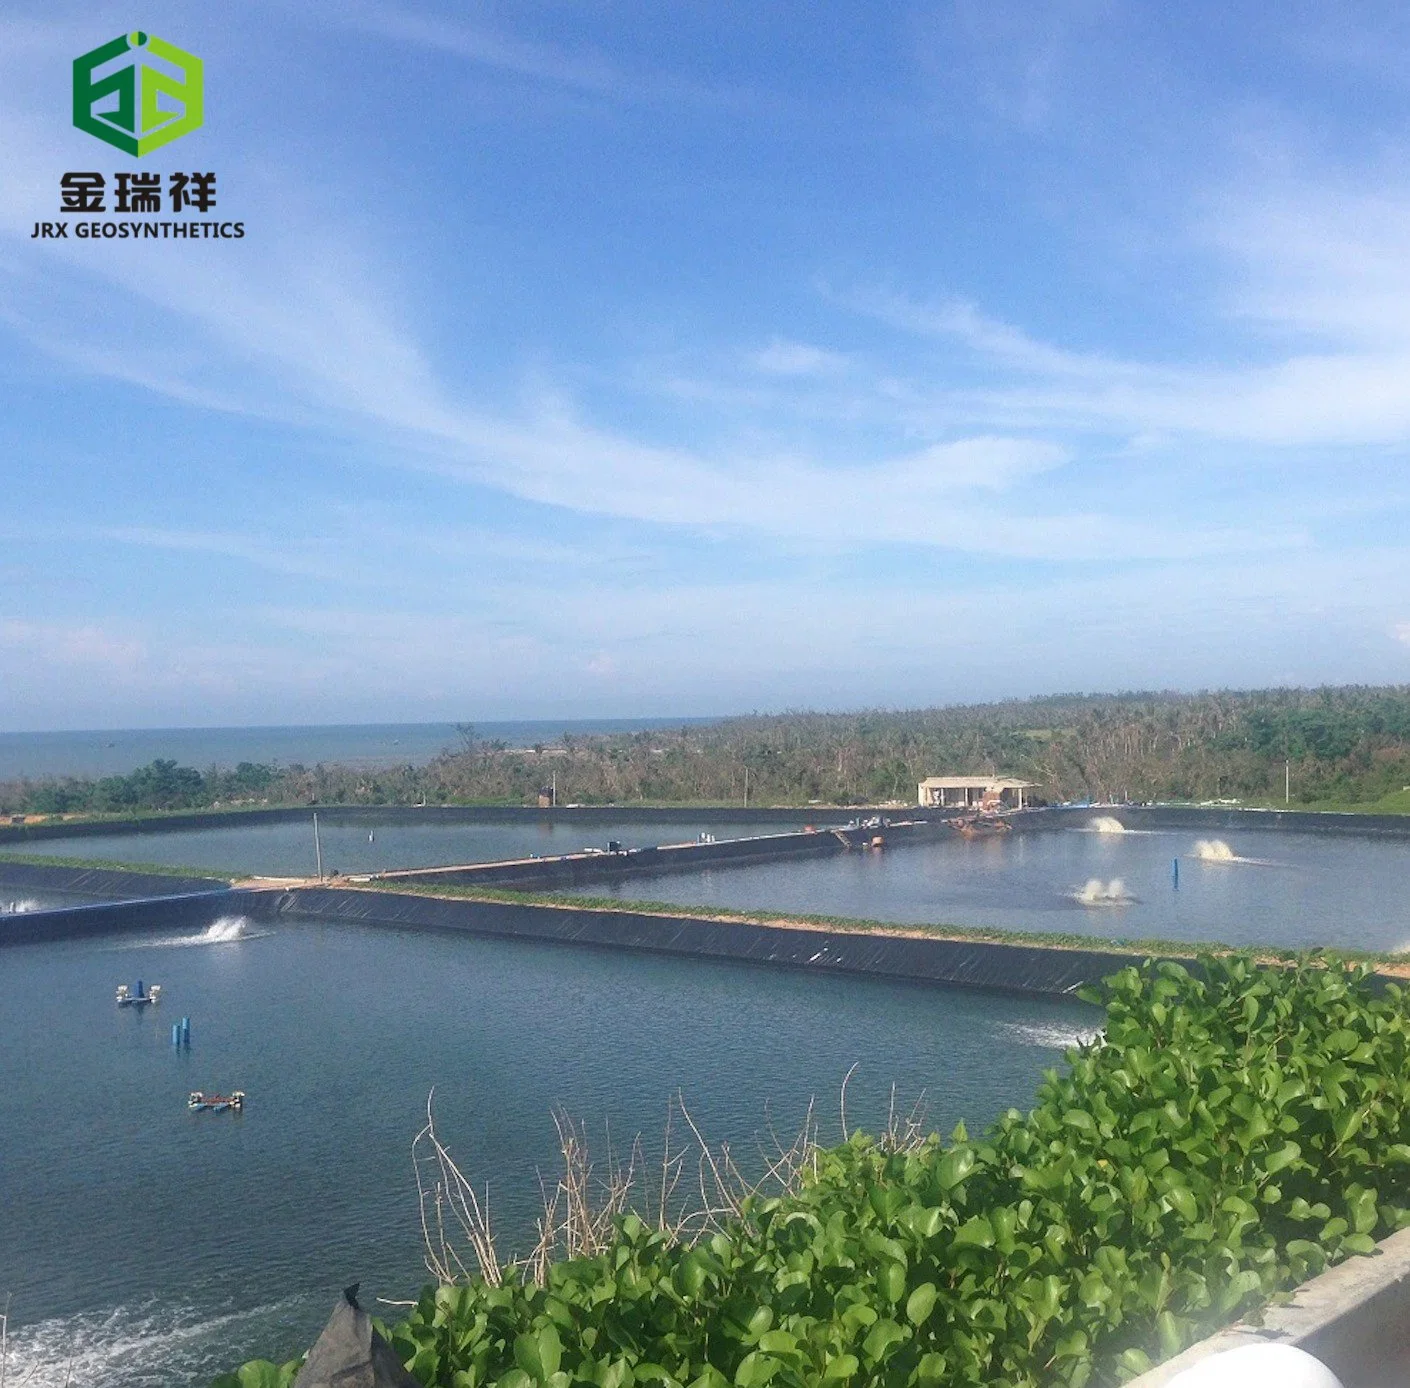 Free Samples Heat Resistant Virgin Waterproof HDPE Geomembrane Liner for Mining Landfill Fish Tank Pond Liner Fish Farming Higher Quality